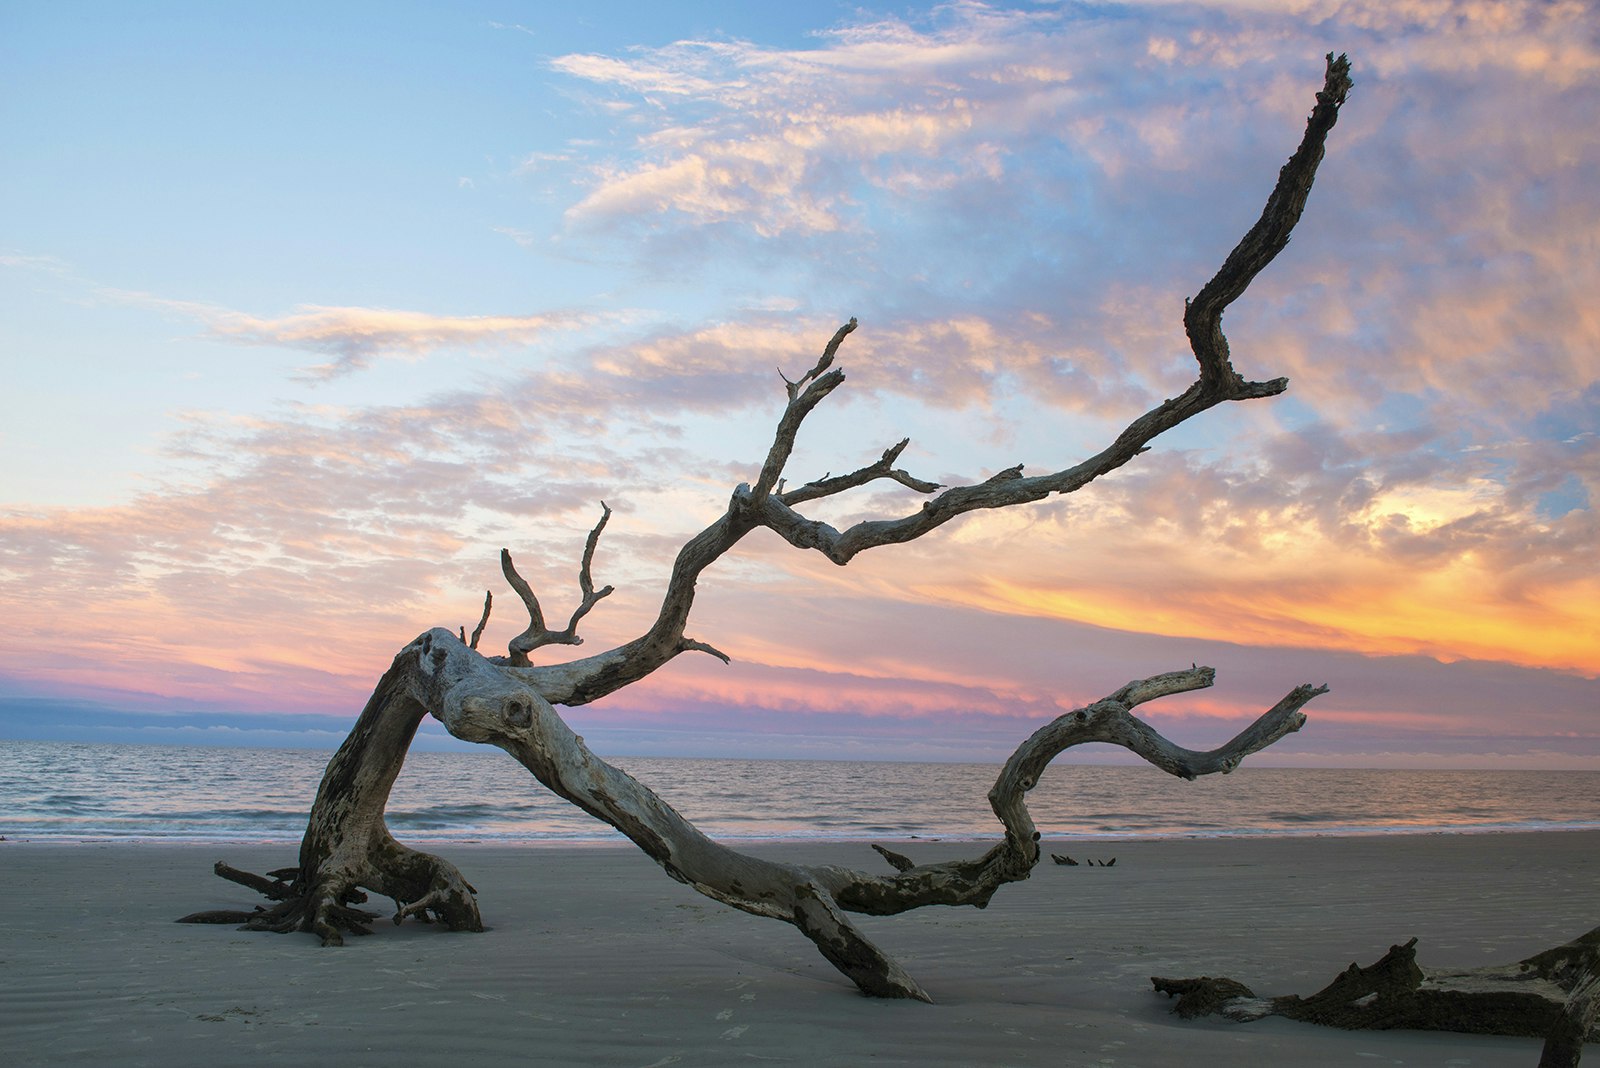 A branch lies on the beach at sunset on Driftwood Beach in Jekyll Island © Christian Herb / Getty Images